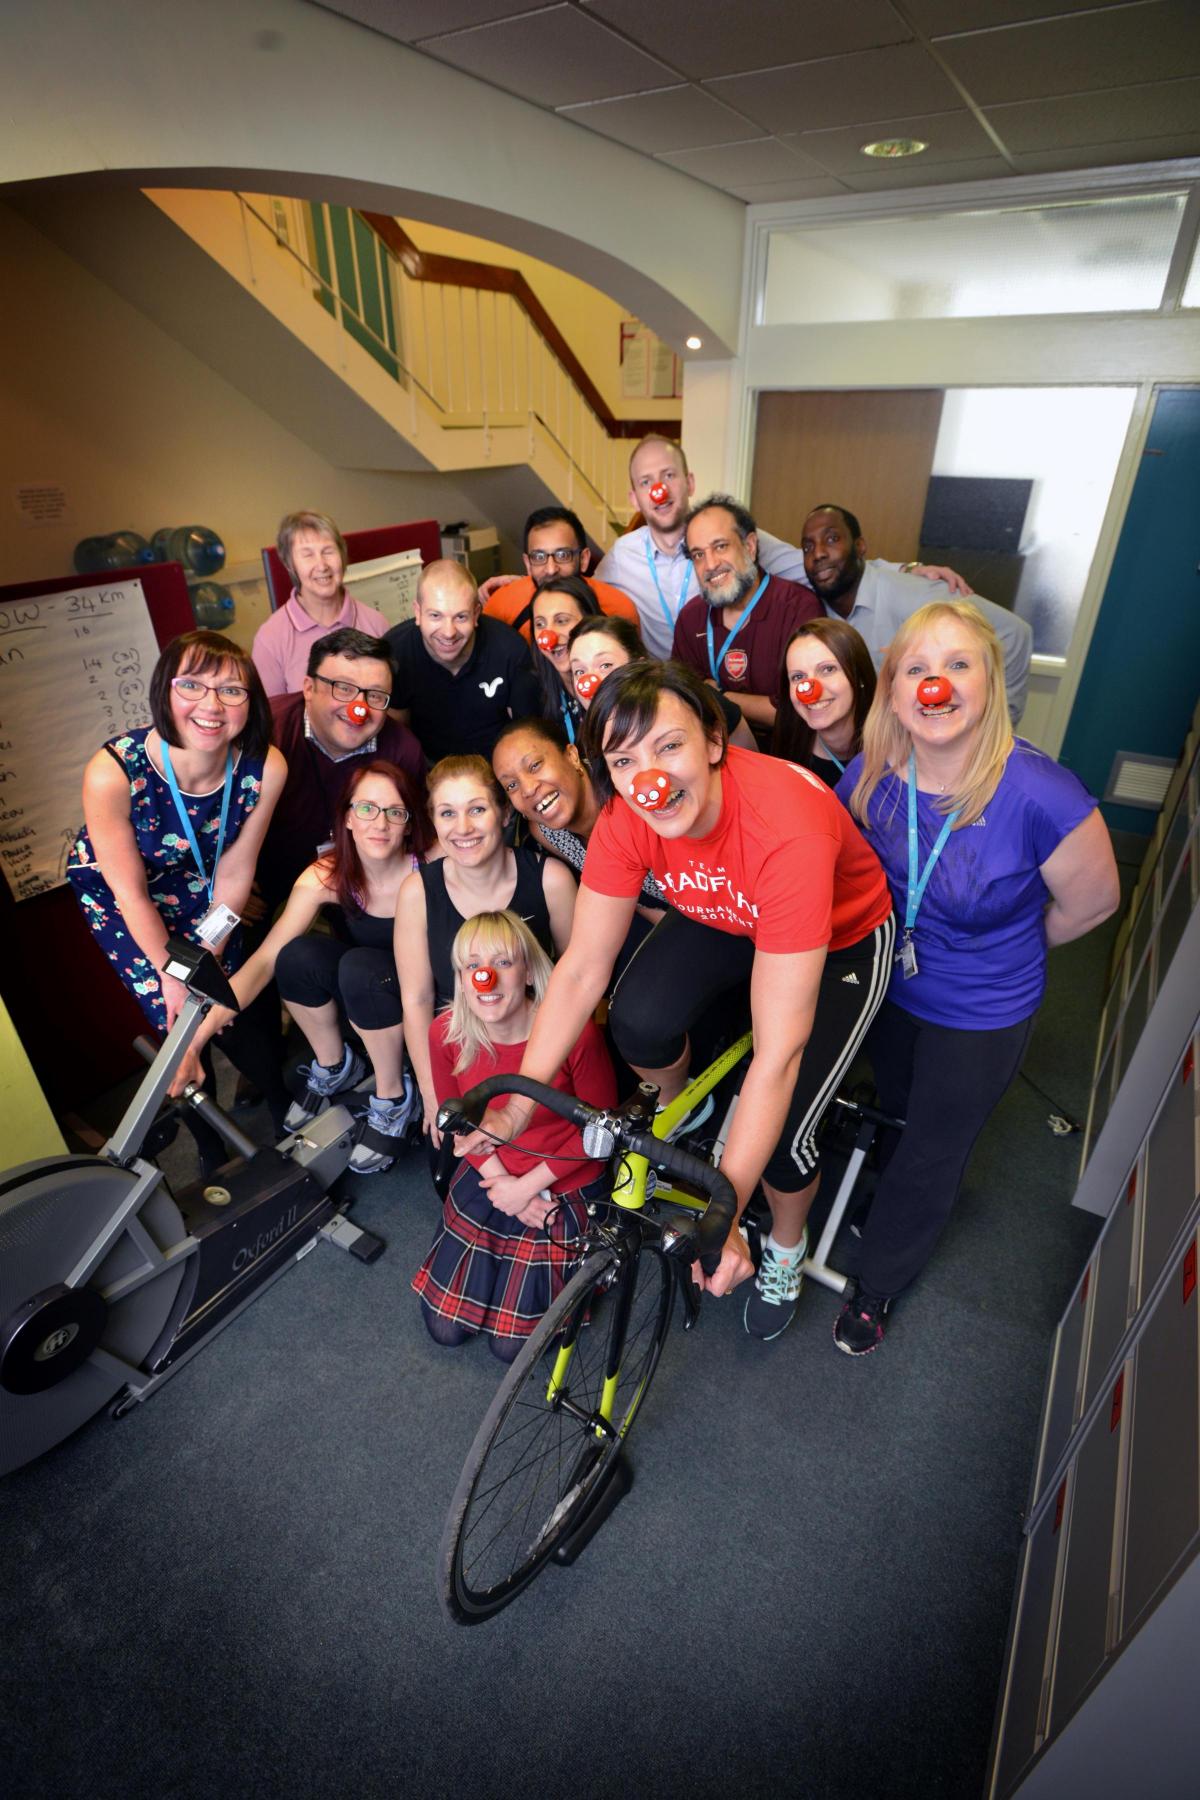 Bradford University admissions team hold a rowing and cycling challenge to raise money for Comic Relief.  Foreground on the bike is Dida Chahal